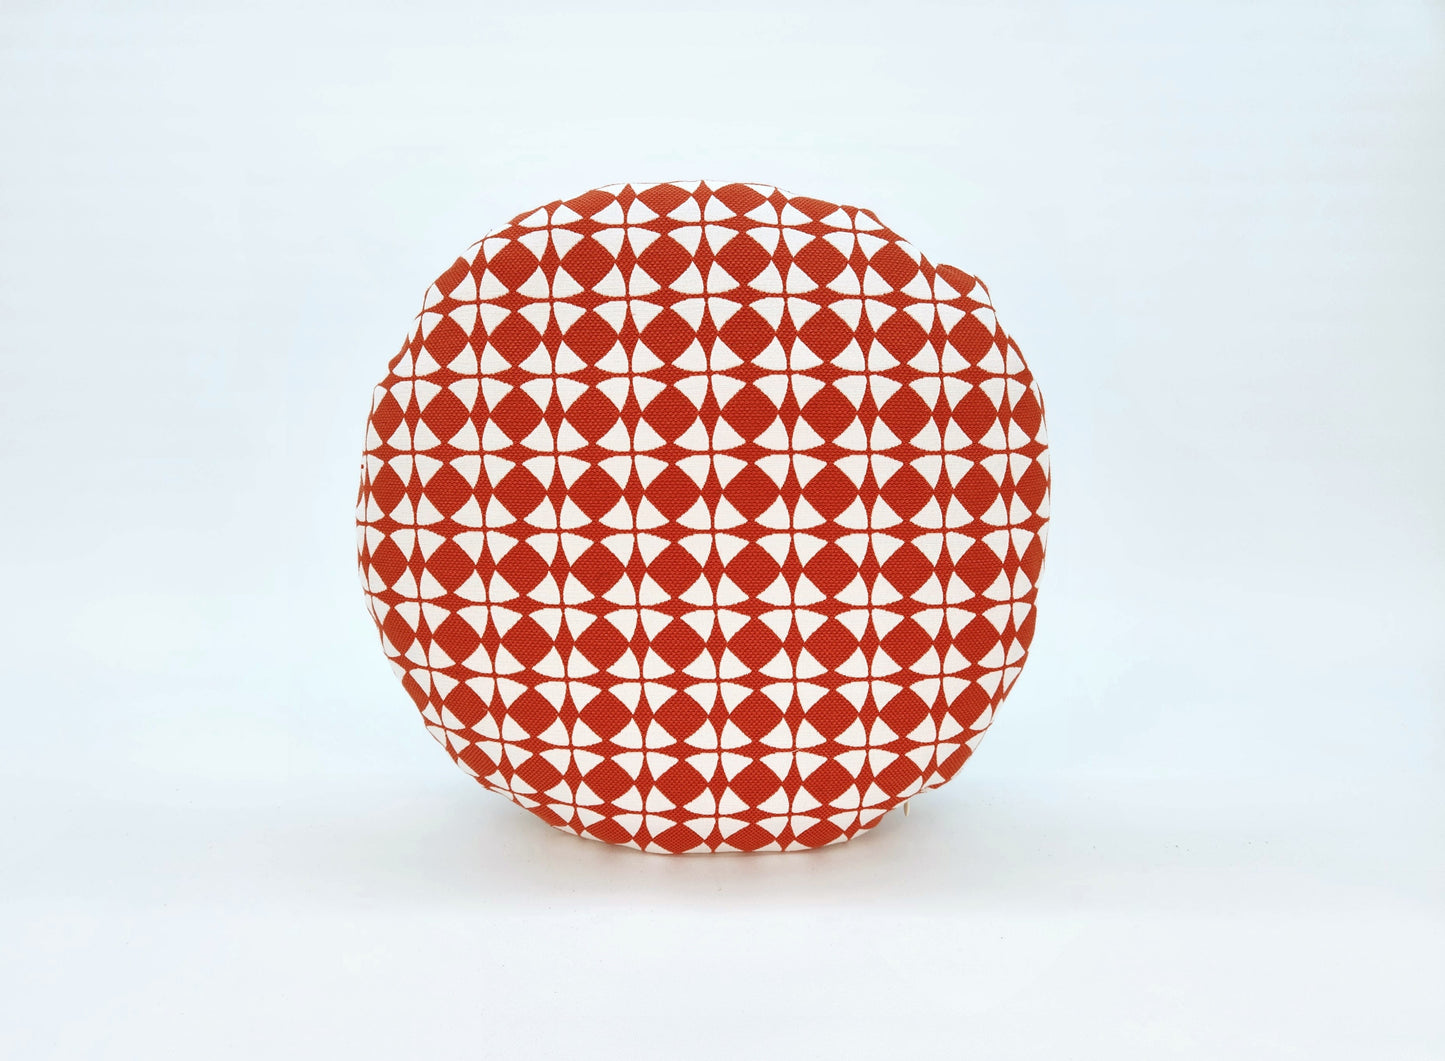 Explorer58 Round 16" Pillow Cover, Thruster Red, with or without Feather Insert, Handmade by Houston and Scott